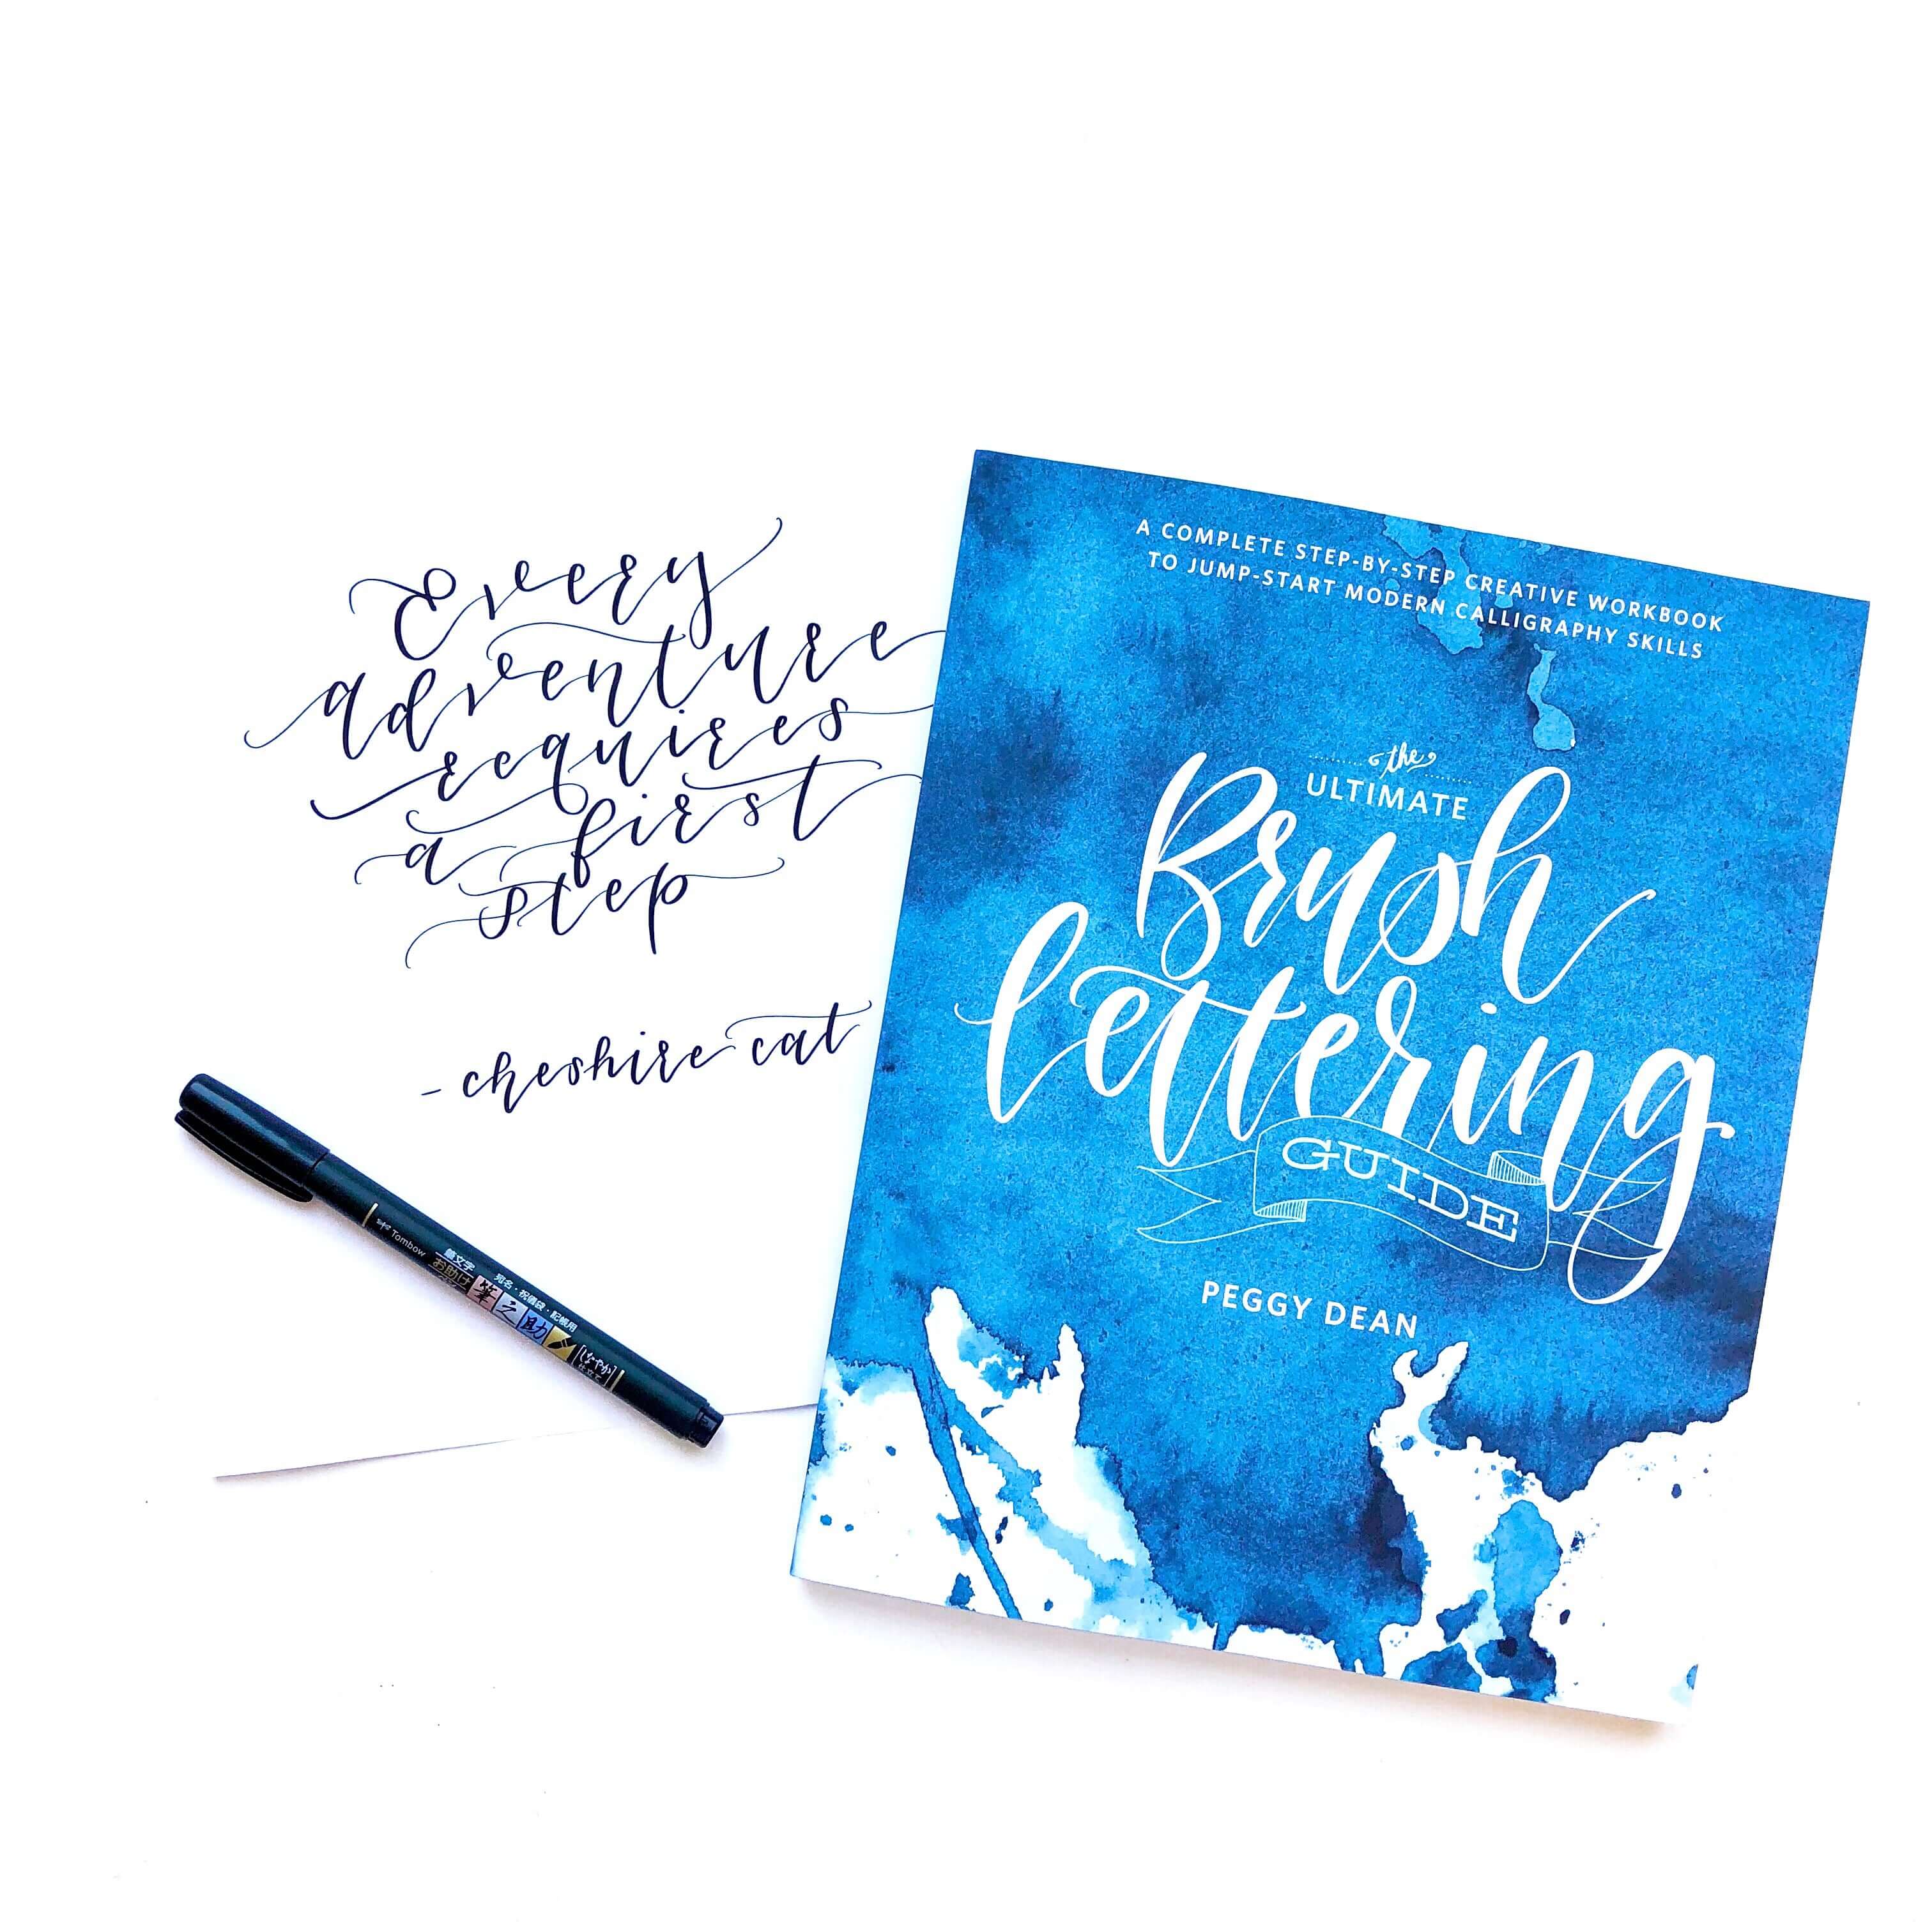 The Ultimate Guide to Modern Calligraphy and Hand Lettering for Beginners